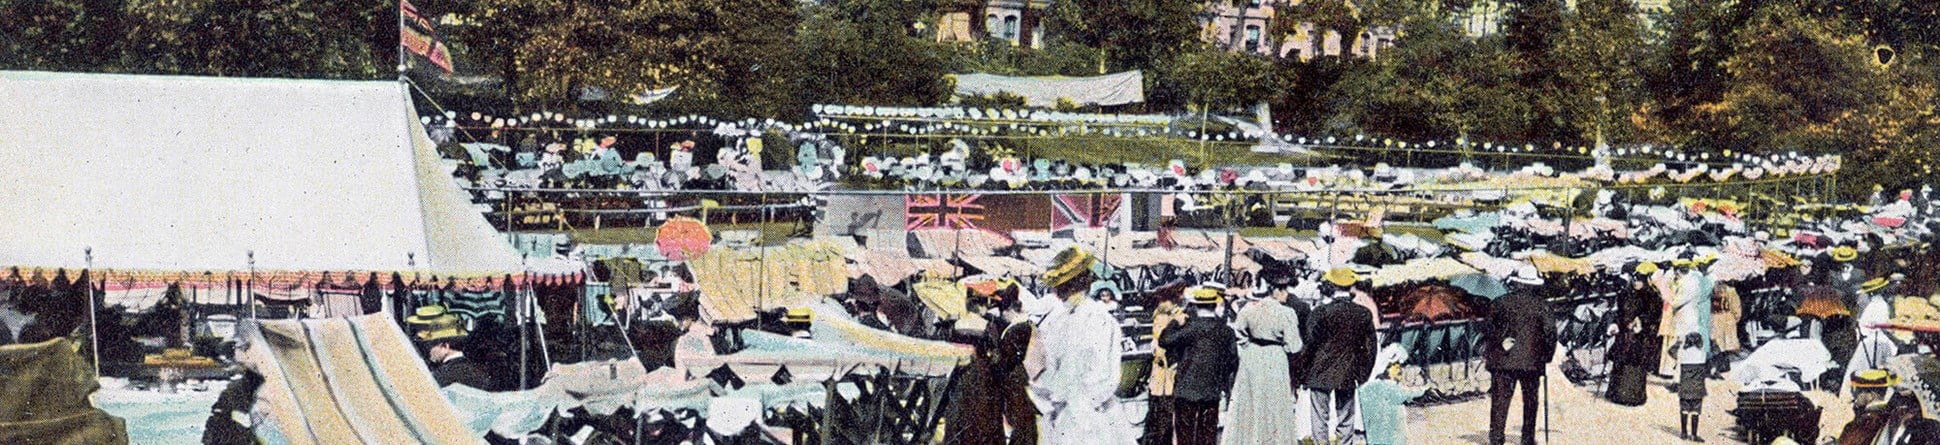 Victorian postcard of visitors sat in rows of deck chairs at Alexandra Park, with houses visible in the background through the trees